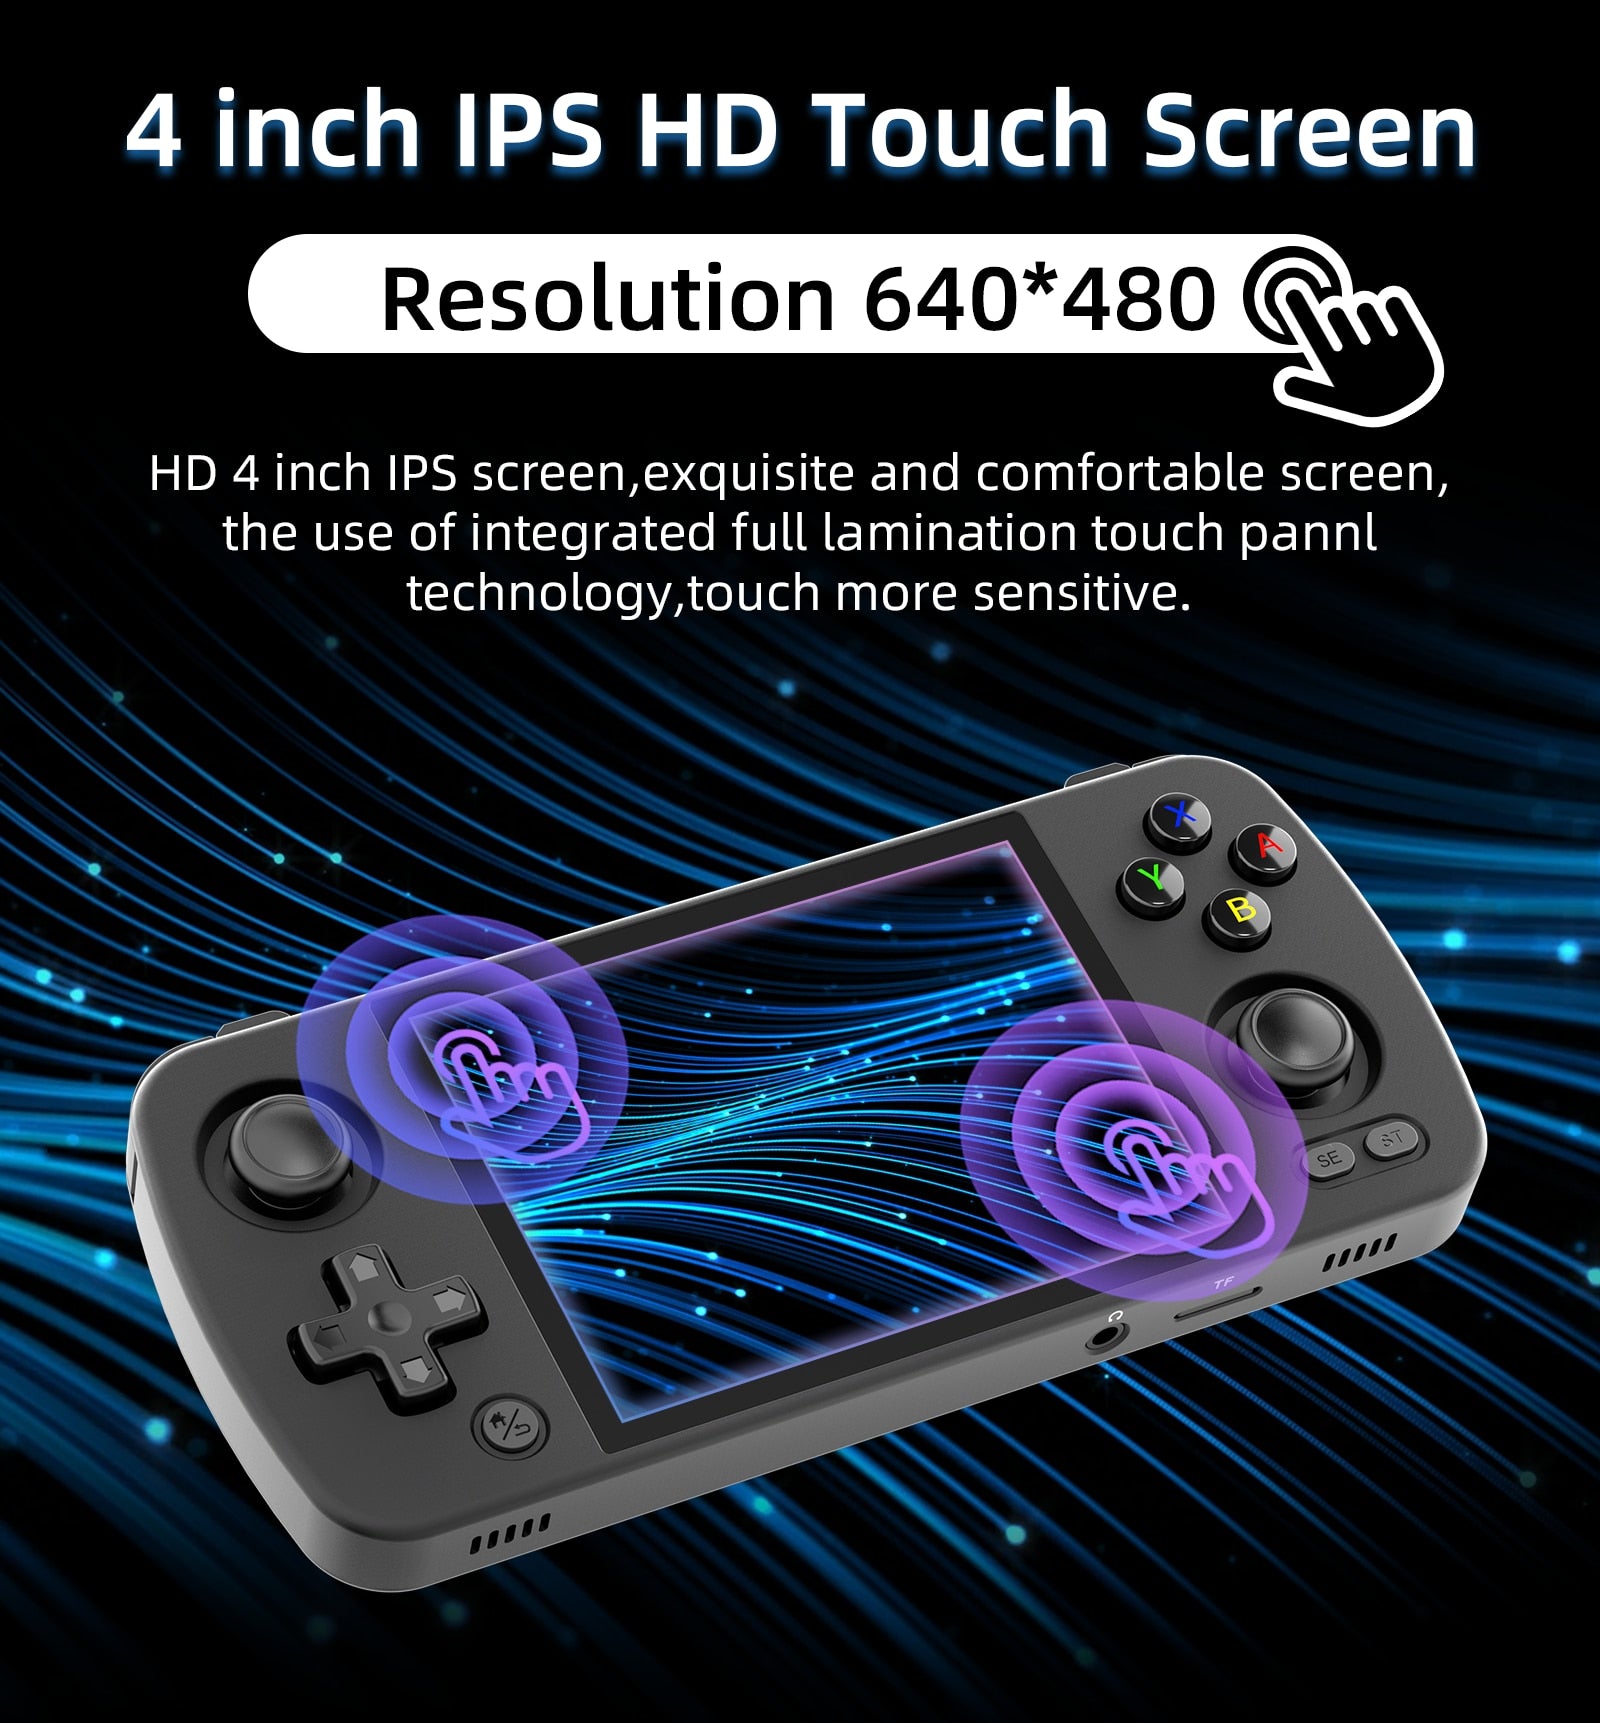 ANBERNIC RG405M Retro Handheld Game Console Android 12 4 inch IPS Touch  Screen T618 CNC/Aluminum Alloy - Black 256GB / Game Consoles Only